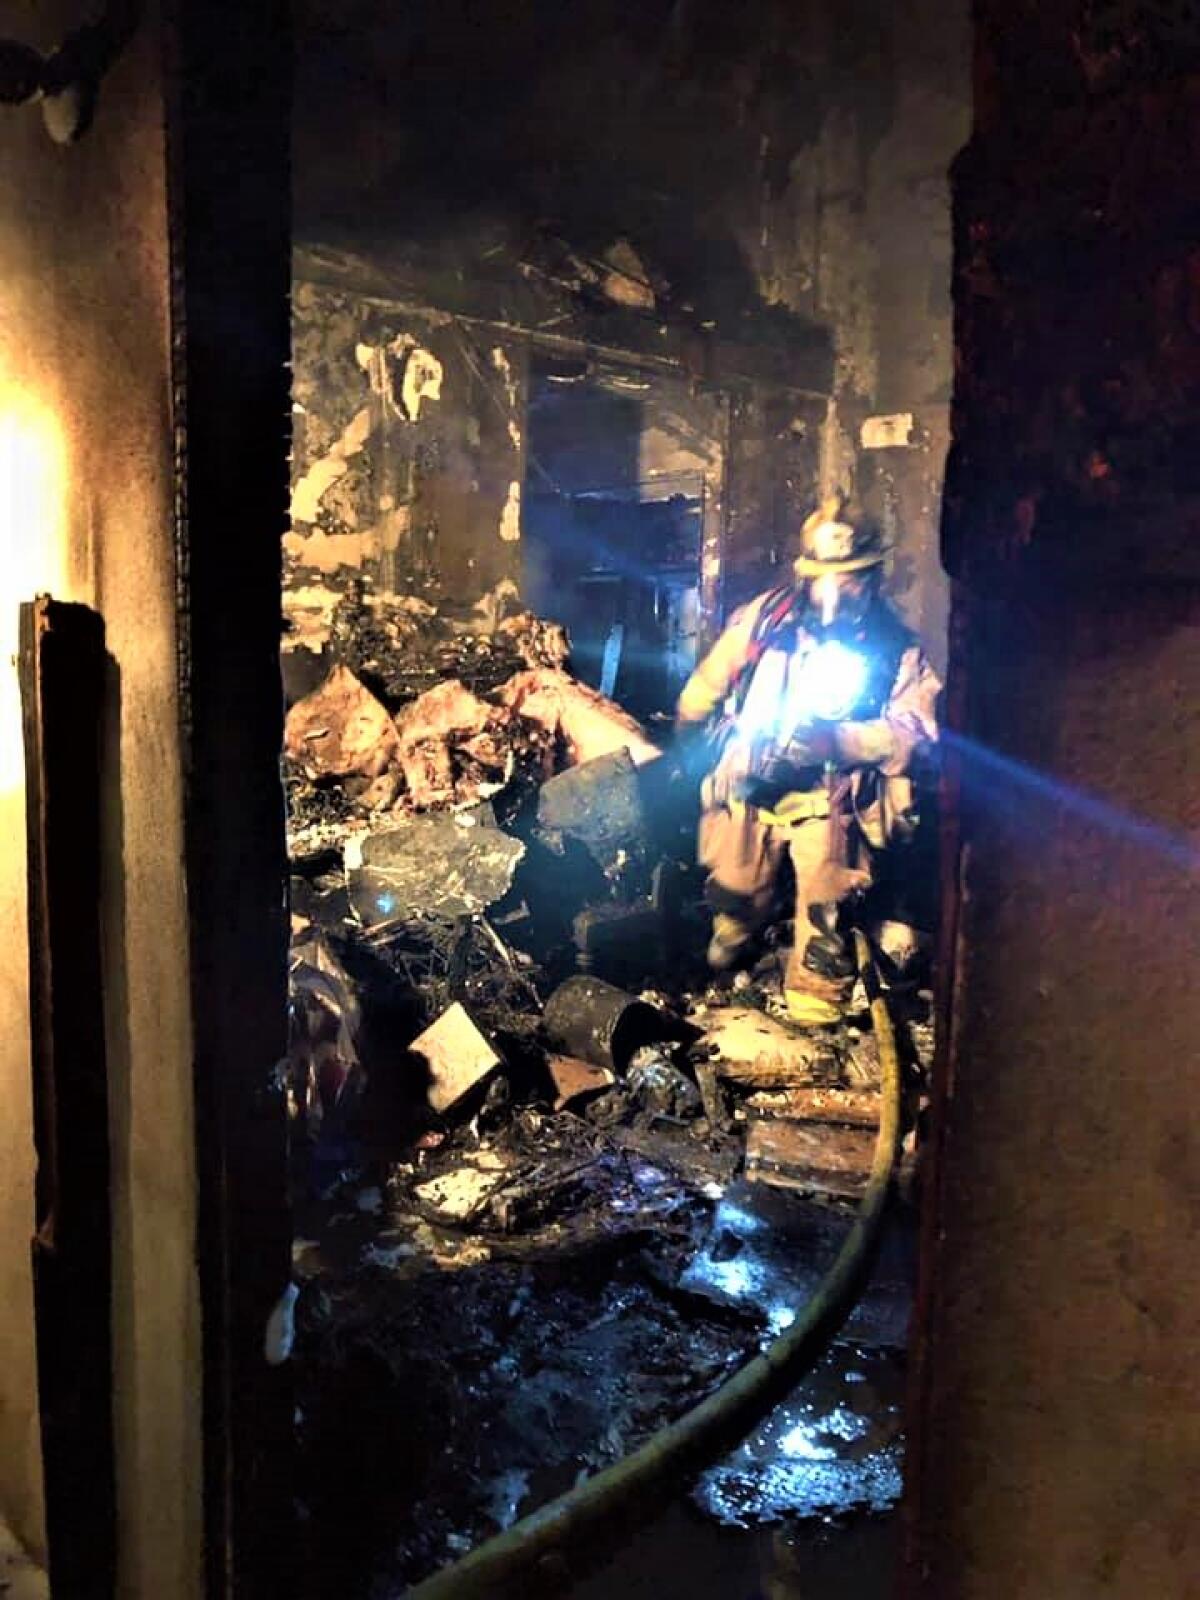 A bedroom at an end-unit apartment on 21st Street in Costa Mesa was heavily damaged by a fire that broke out Saturday night.